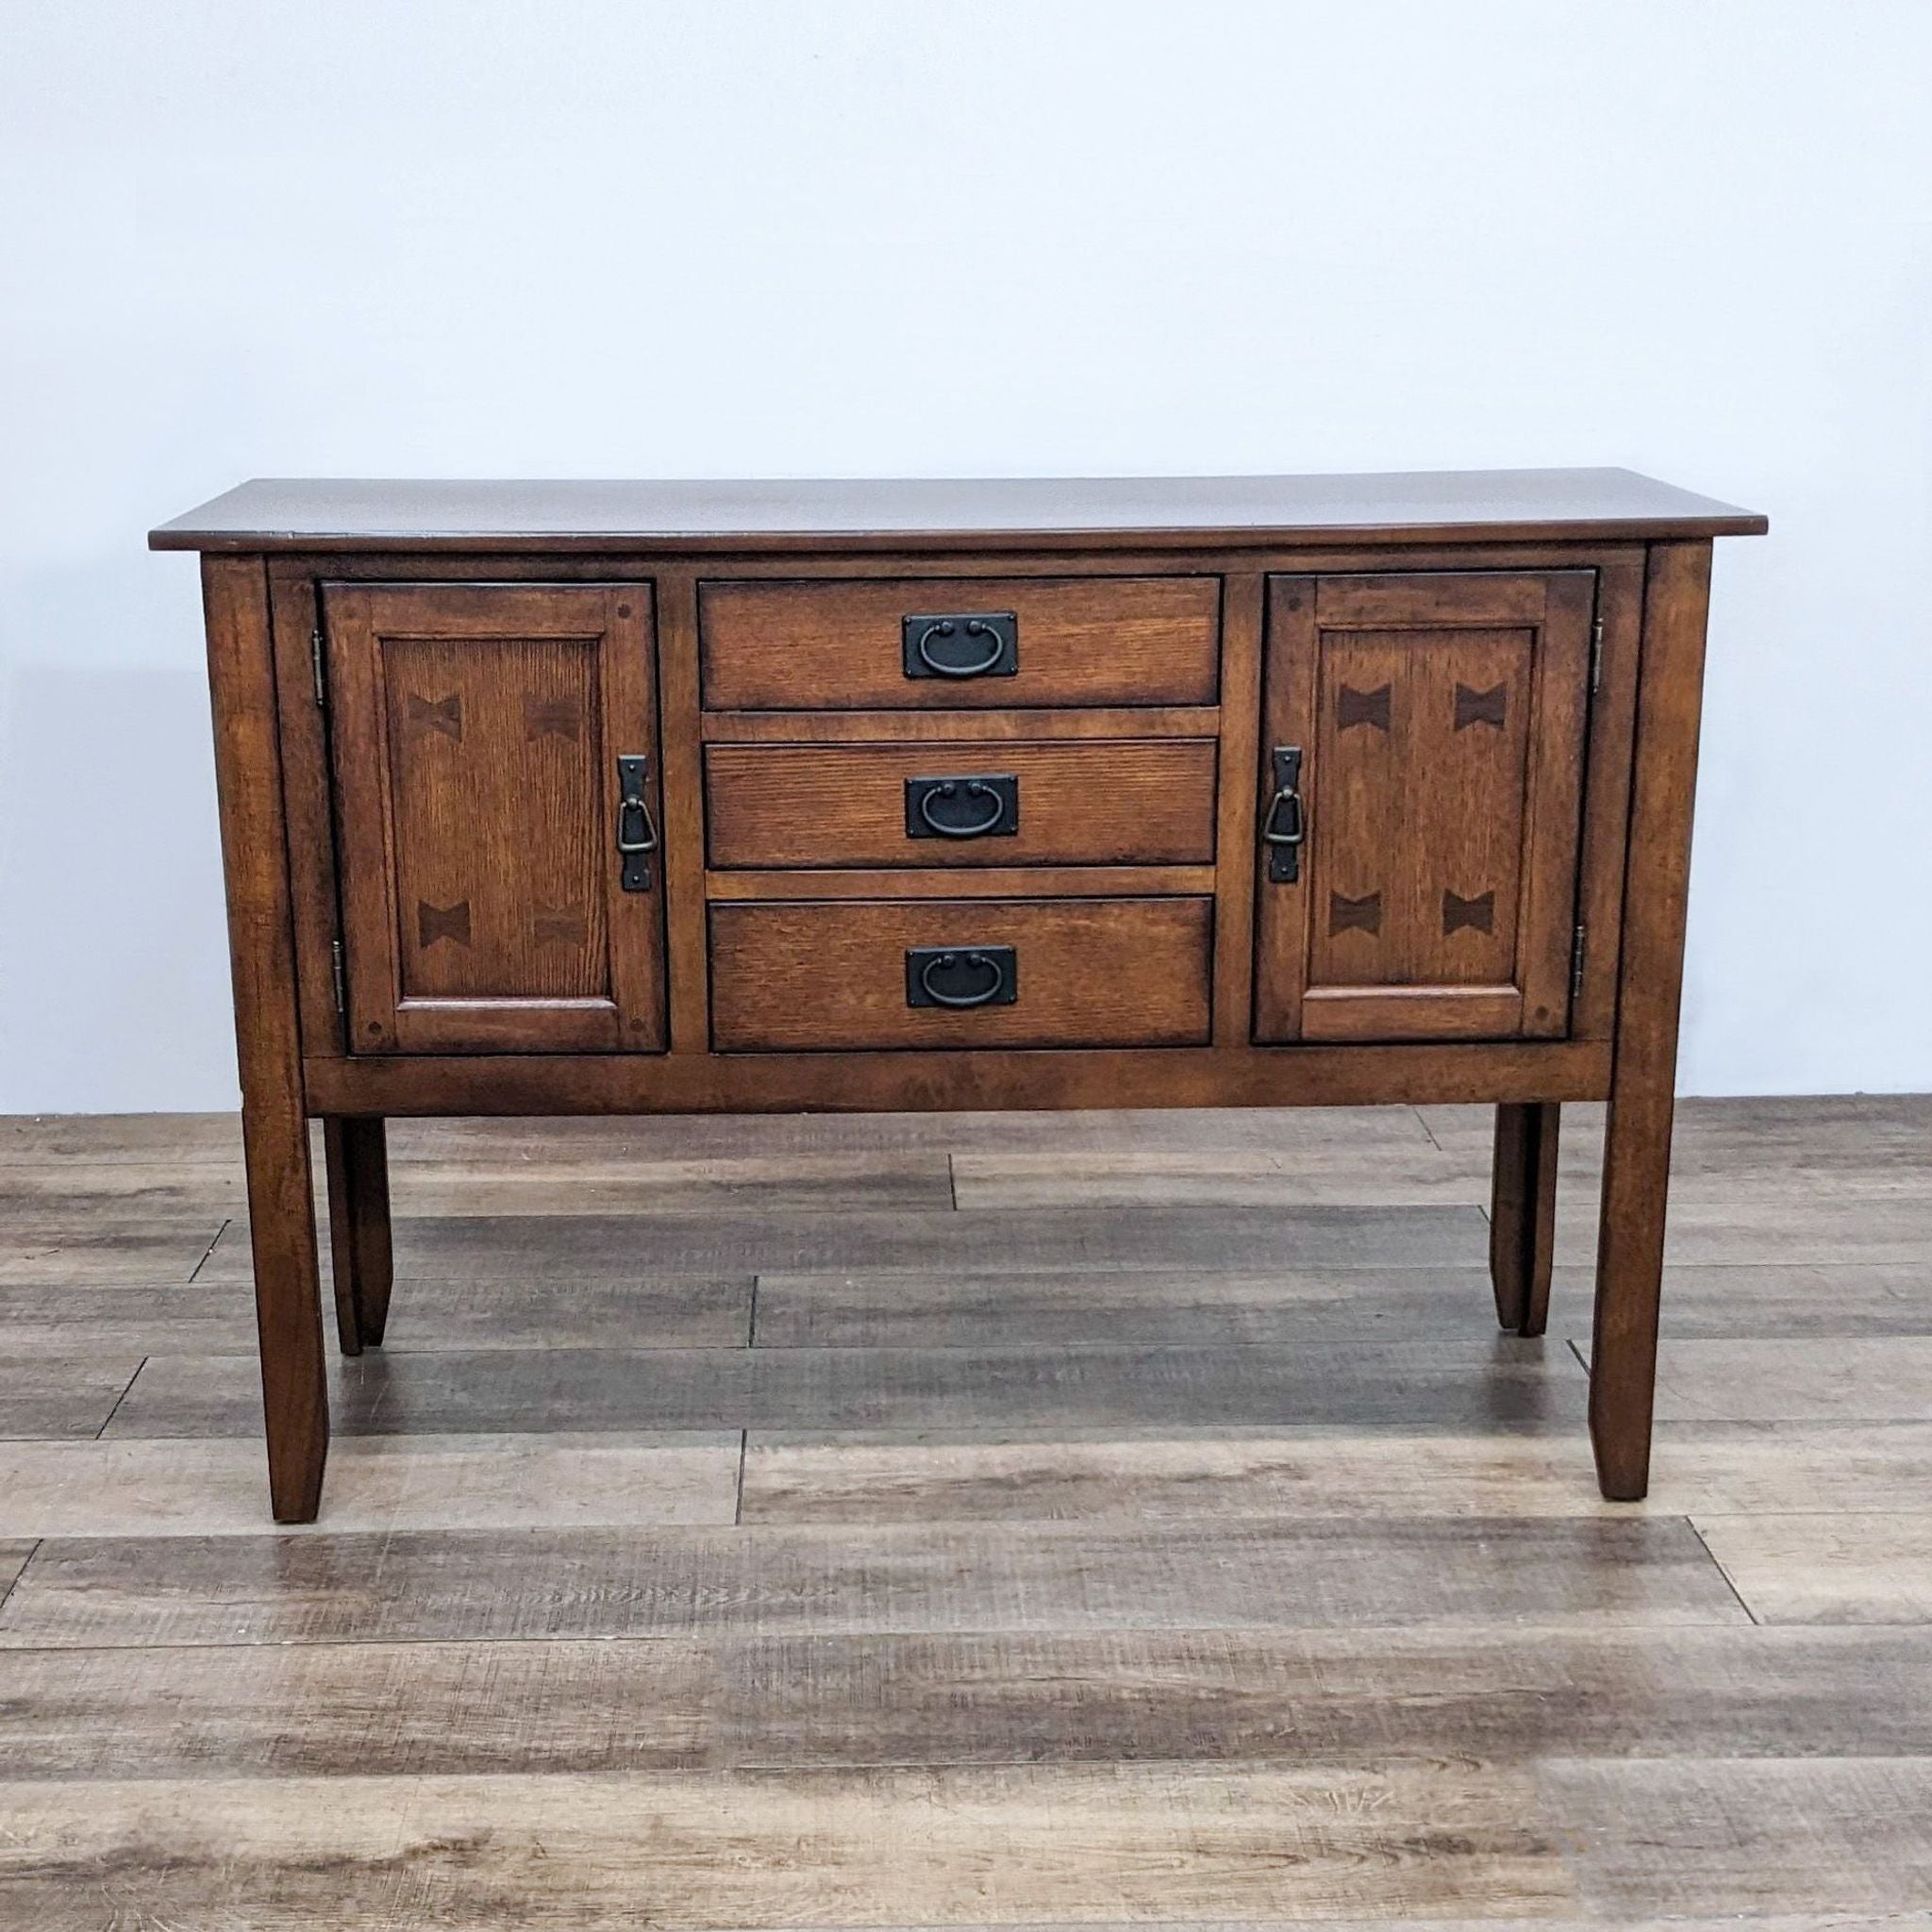 Alt text 1: Reperch brand sideboard with bow tie inlays, closed cabinet doors and central drawers, on a wooden floor.